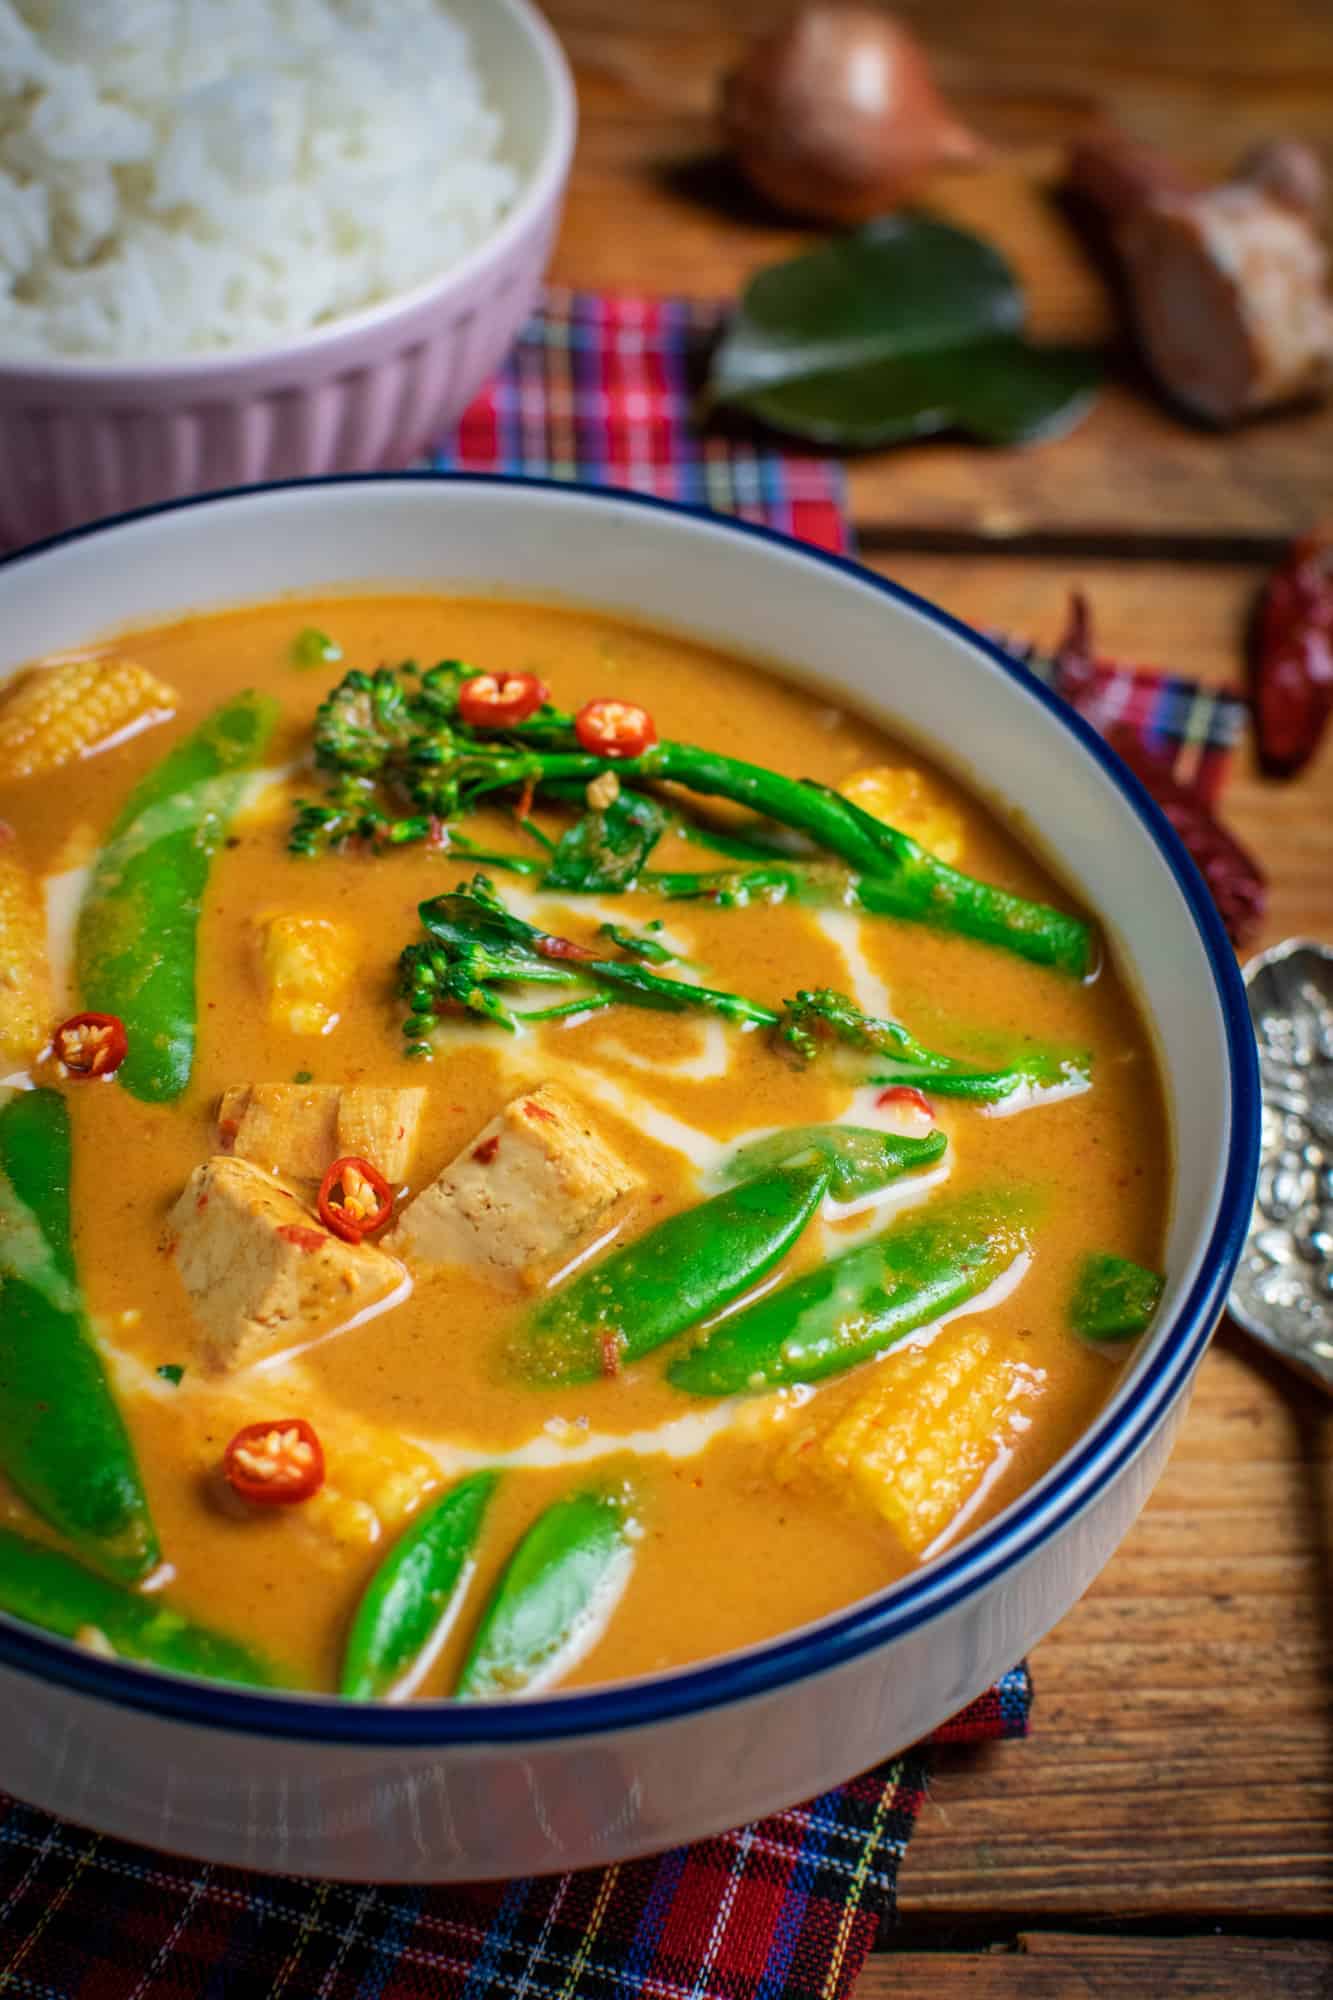 Thai red vegetable curry with rice in the background and ingredients such as Kaffir Lime leaves, chillies and onion